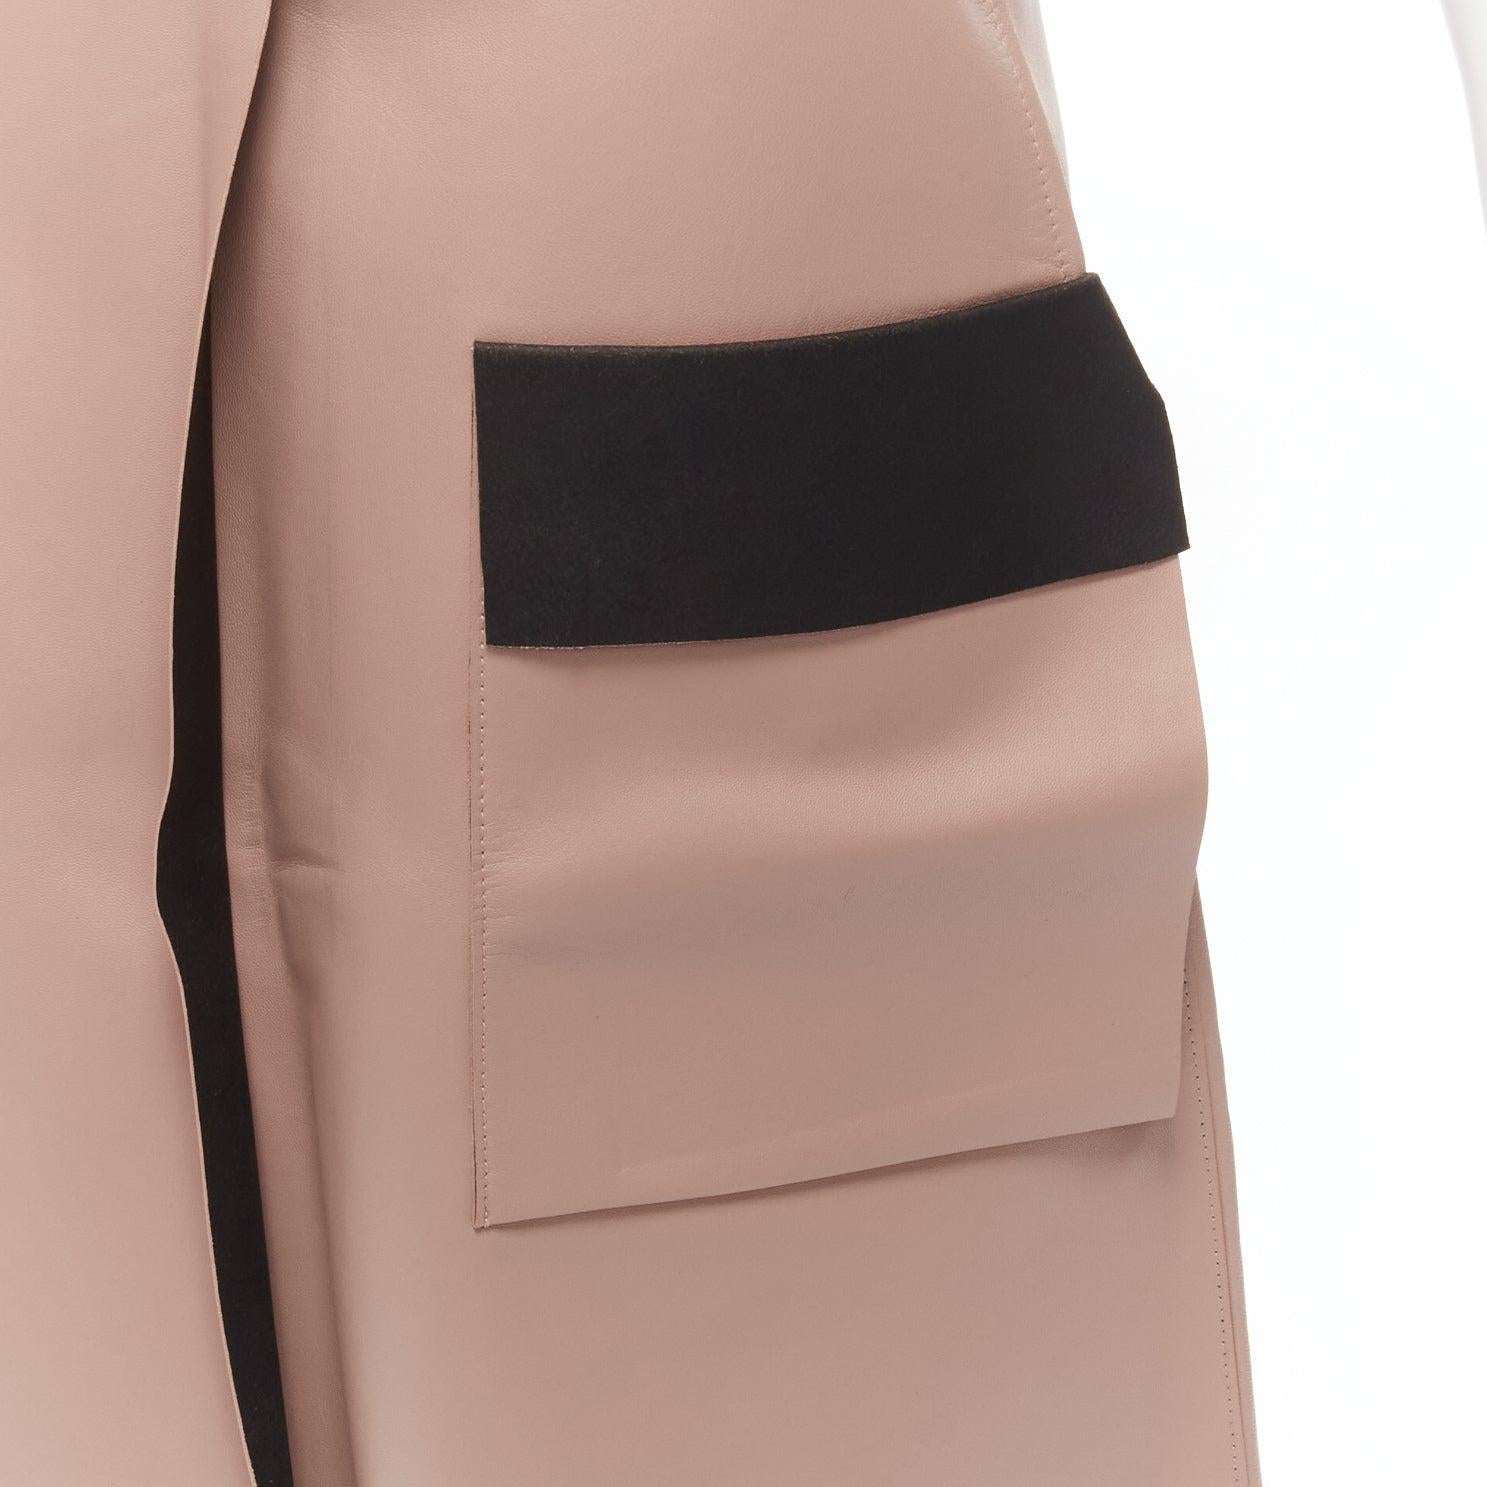 DION LEE Sandy pink brown sheep leather panelled A-line midi skirt UK6 XS
Reference: SNKO/A00313
Brand: Dion Lee
Material: Leather
Color: Pink, Brown
Pattern: Solid
Closure: Zip
Extra Details: Back zip detail. Non-functional flap pockets at